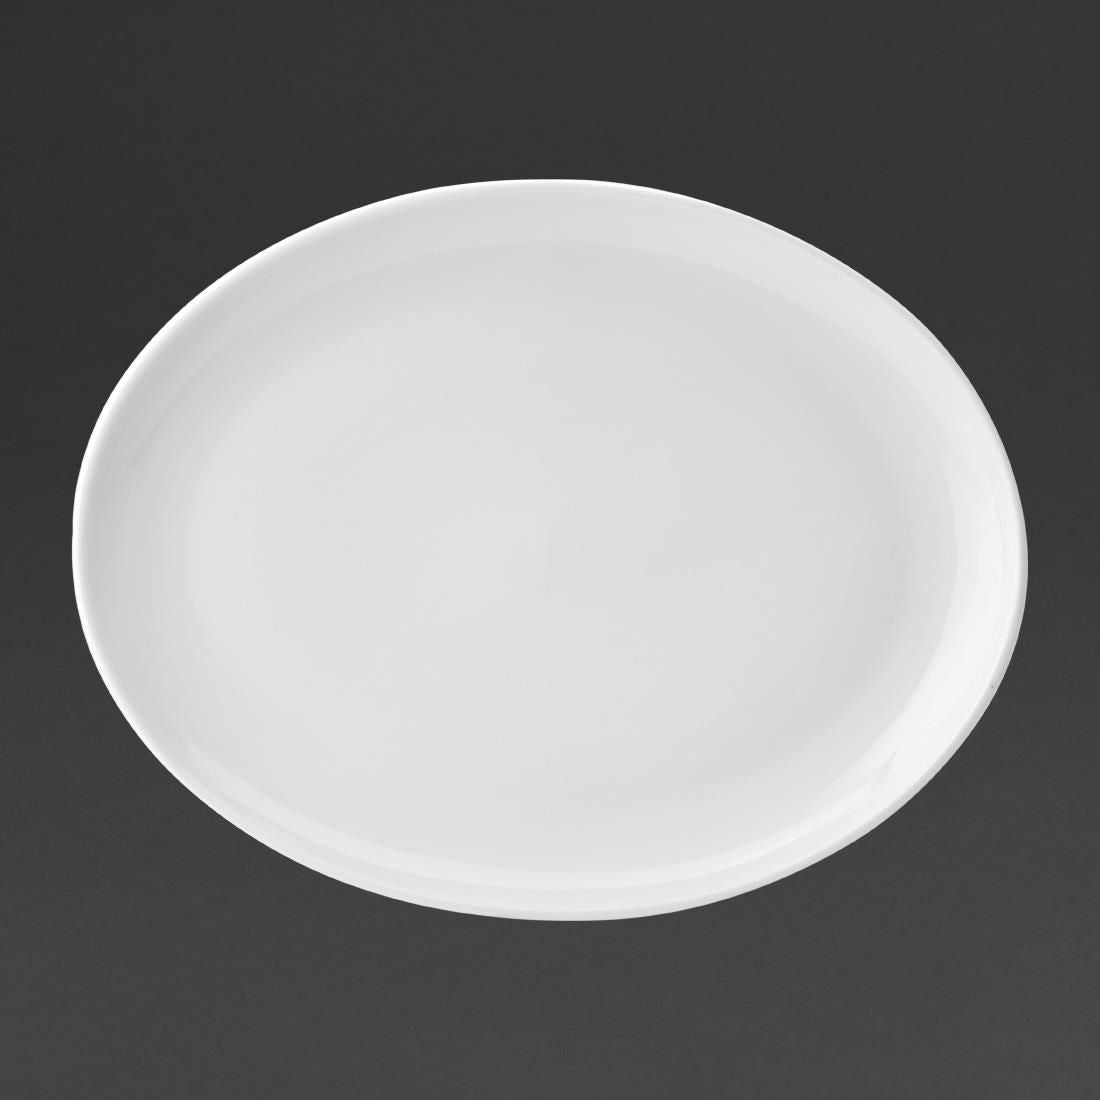 Utopia Pure White Oval Plates 360mm (Pack of 18)